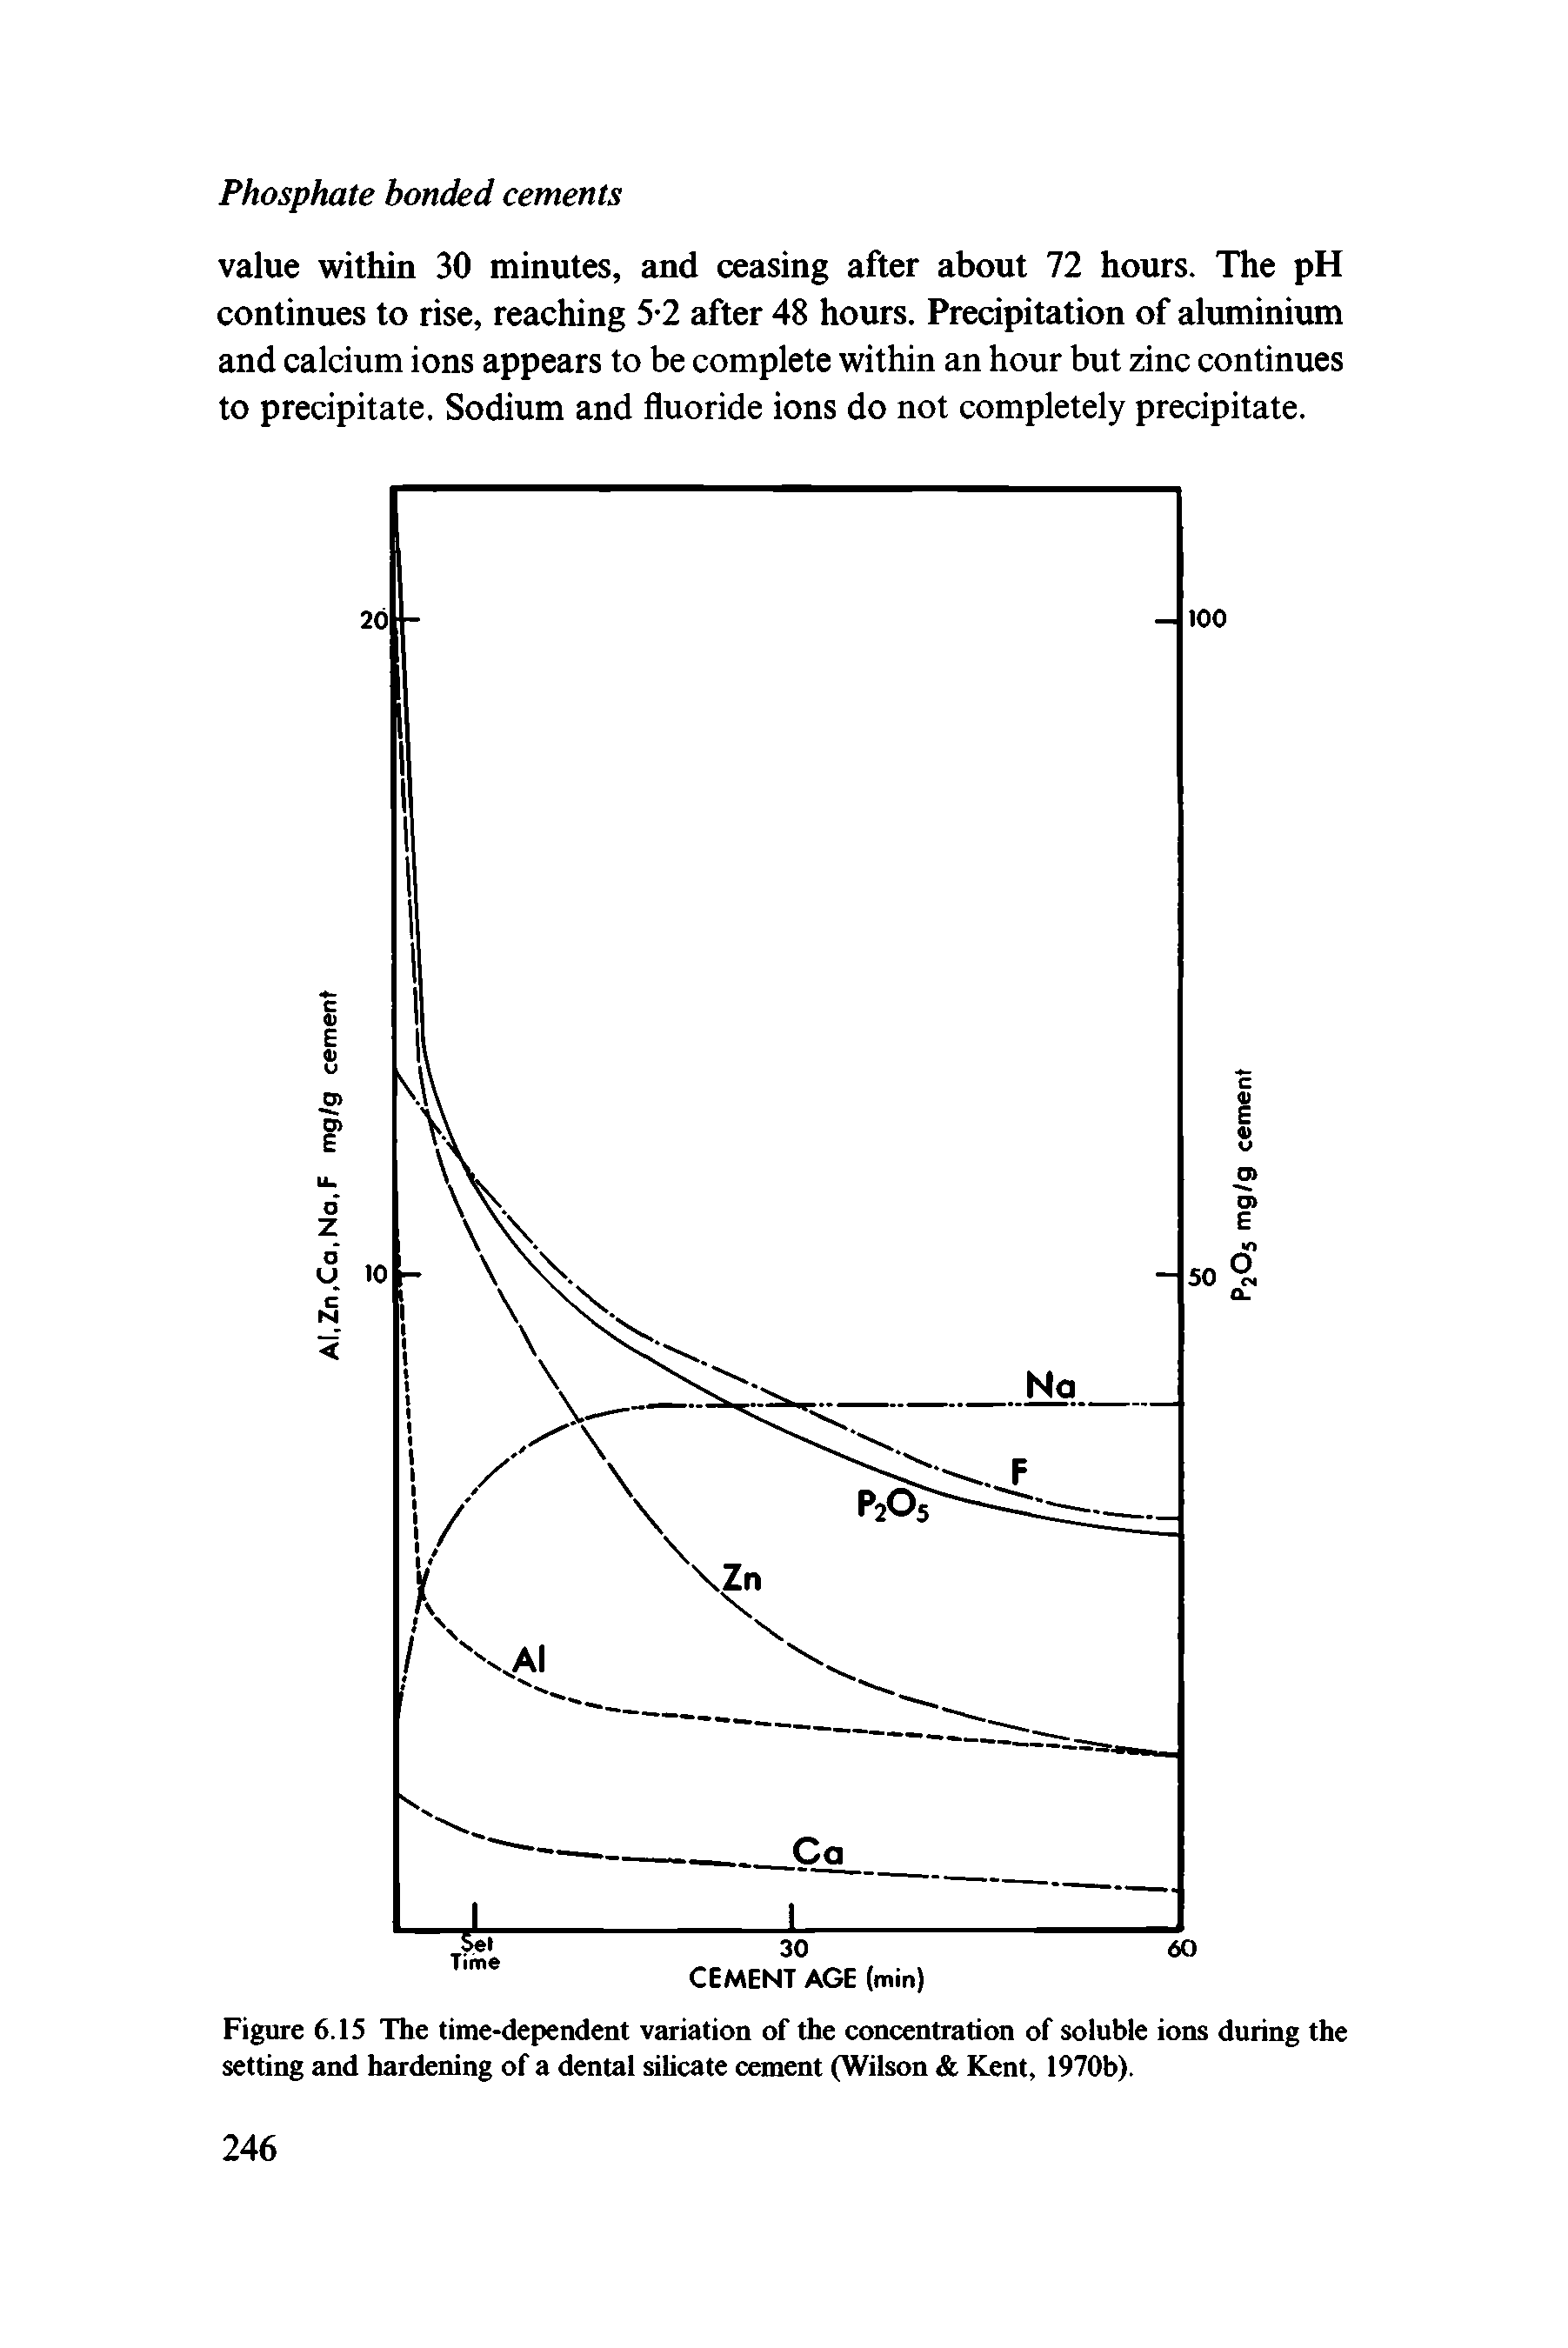 Figure 6.15 The time-dependent variation of the concentration of soluble ions during the setting and hardening of a dental sihcate eement (Wilson Kent, 1970b).